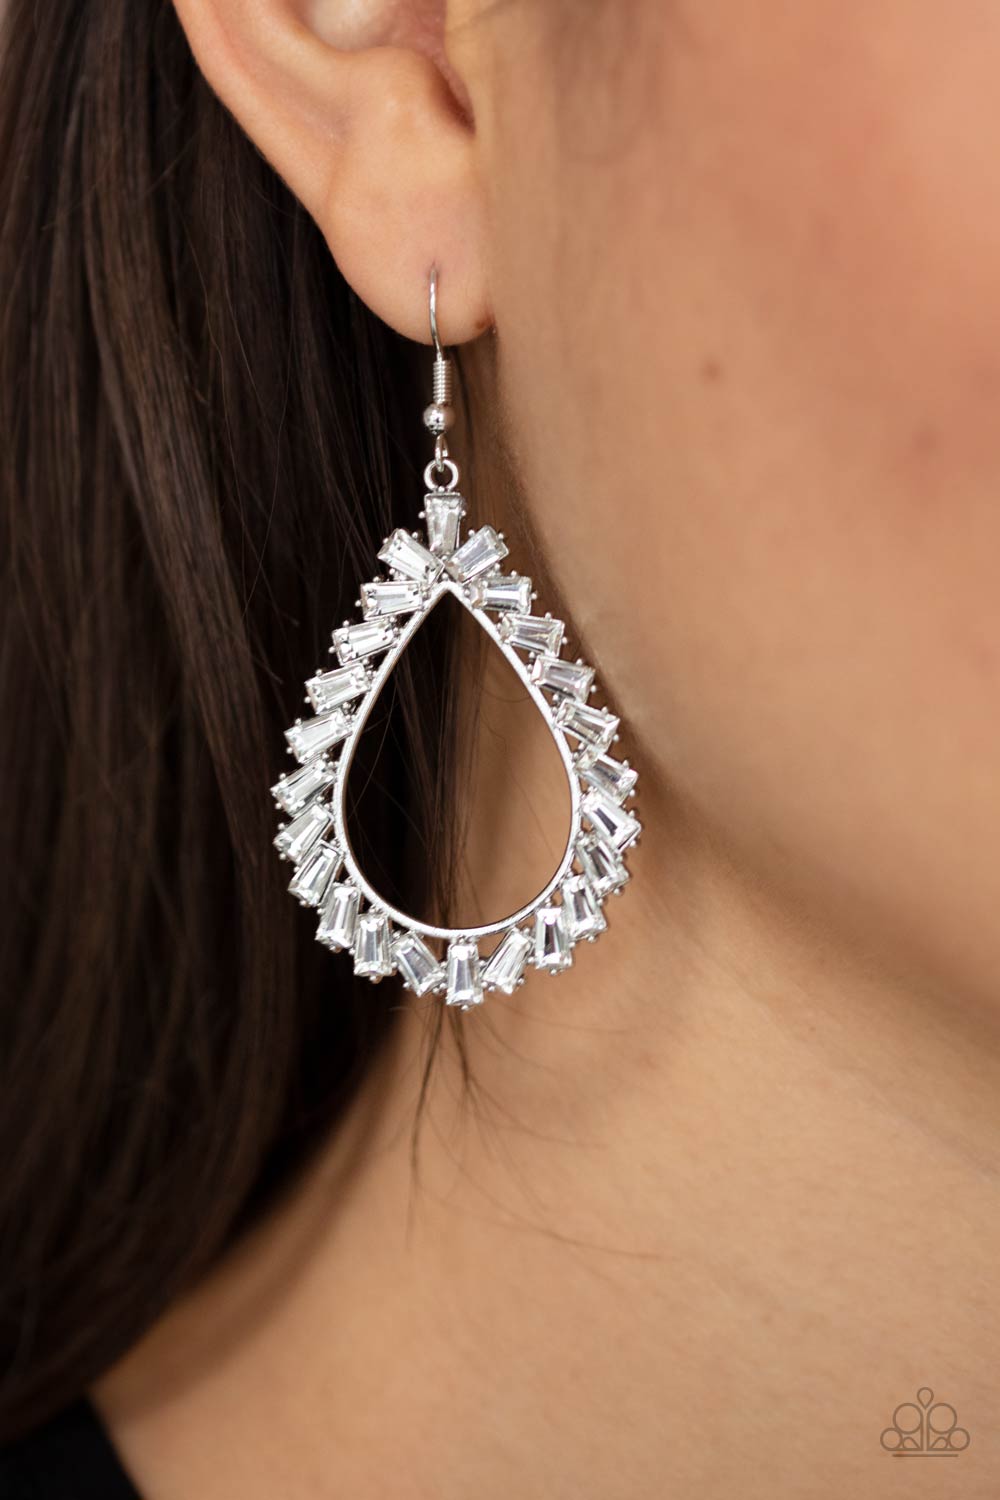 Paparazzi Stay Sharp - White Earrings - A Finishing Touch Jewelry